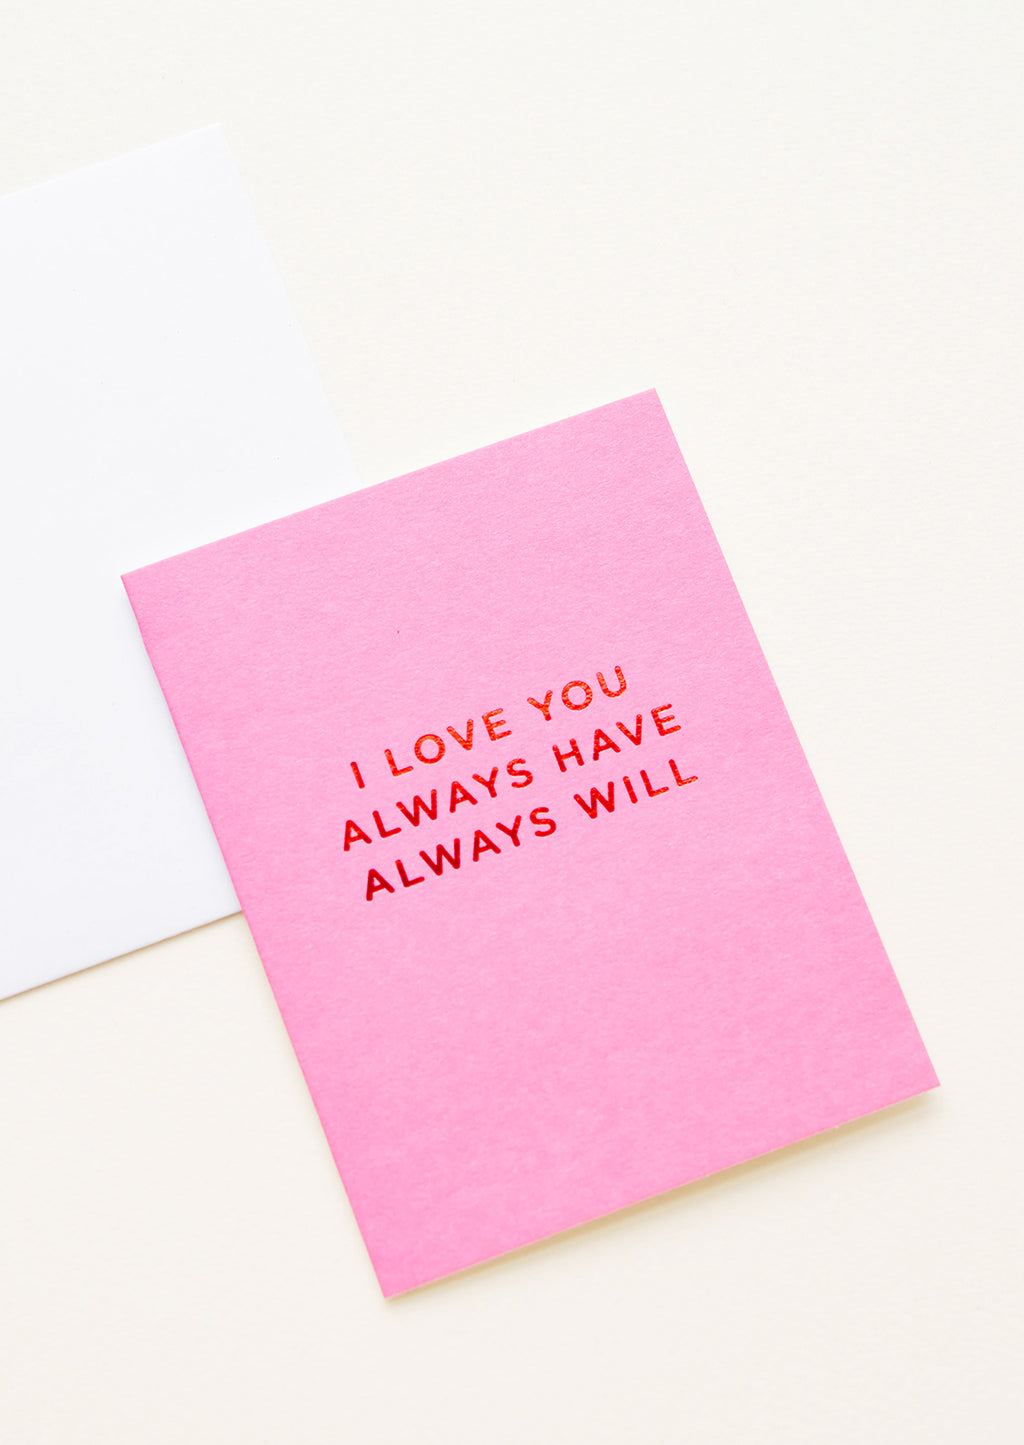 2: A white envelope and bright pink greeting card with the words "I love you always have always will" in red foil.